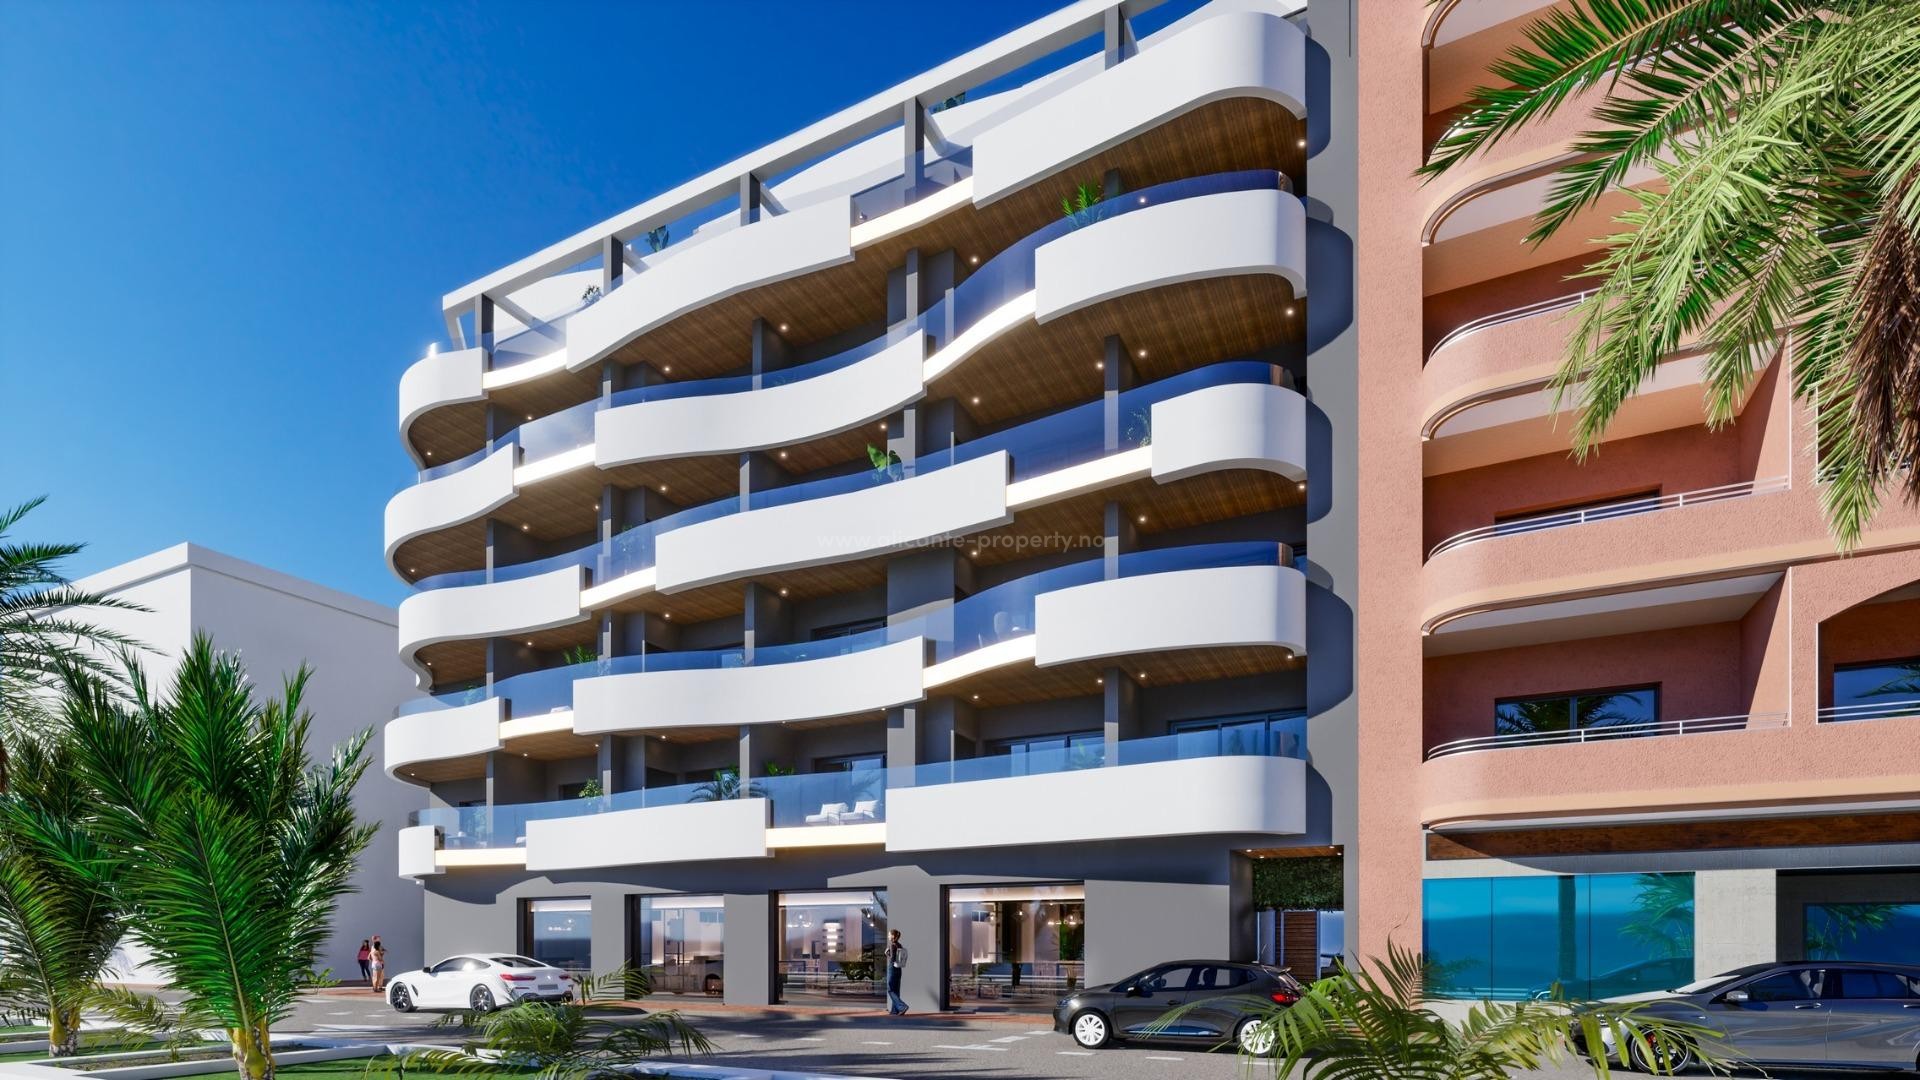 Exclusive apartments and penthouses in Torrevieja with avant-garde design, 2/3 bedrooms, 2 bathrooms. Residential located in the heart of Torrevieja